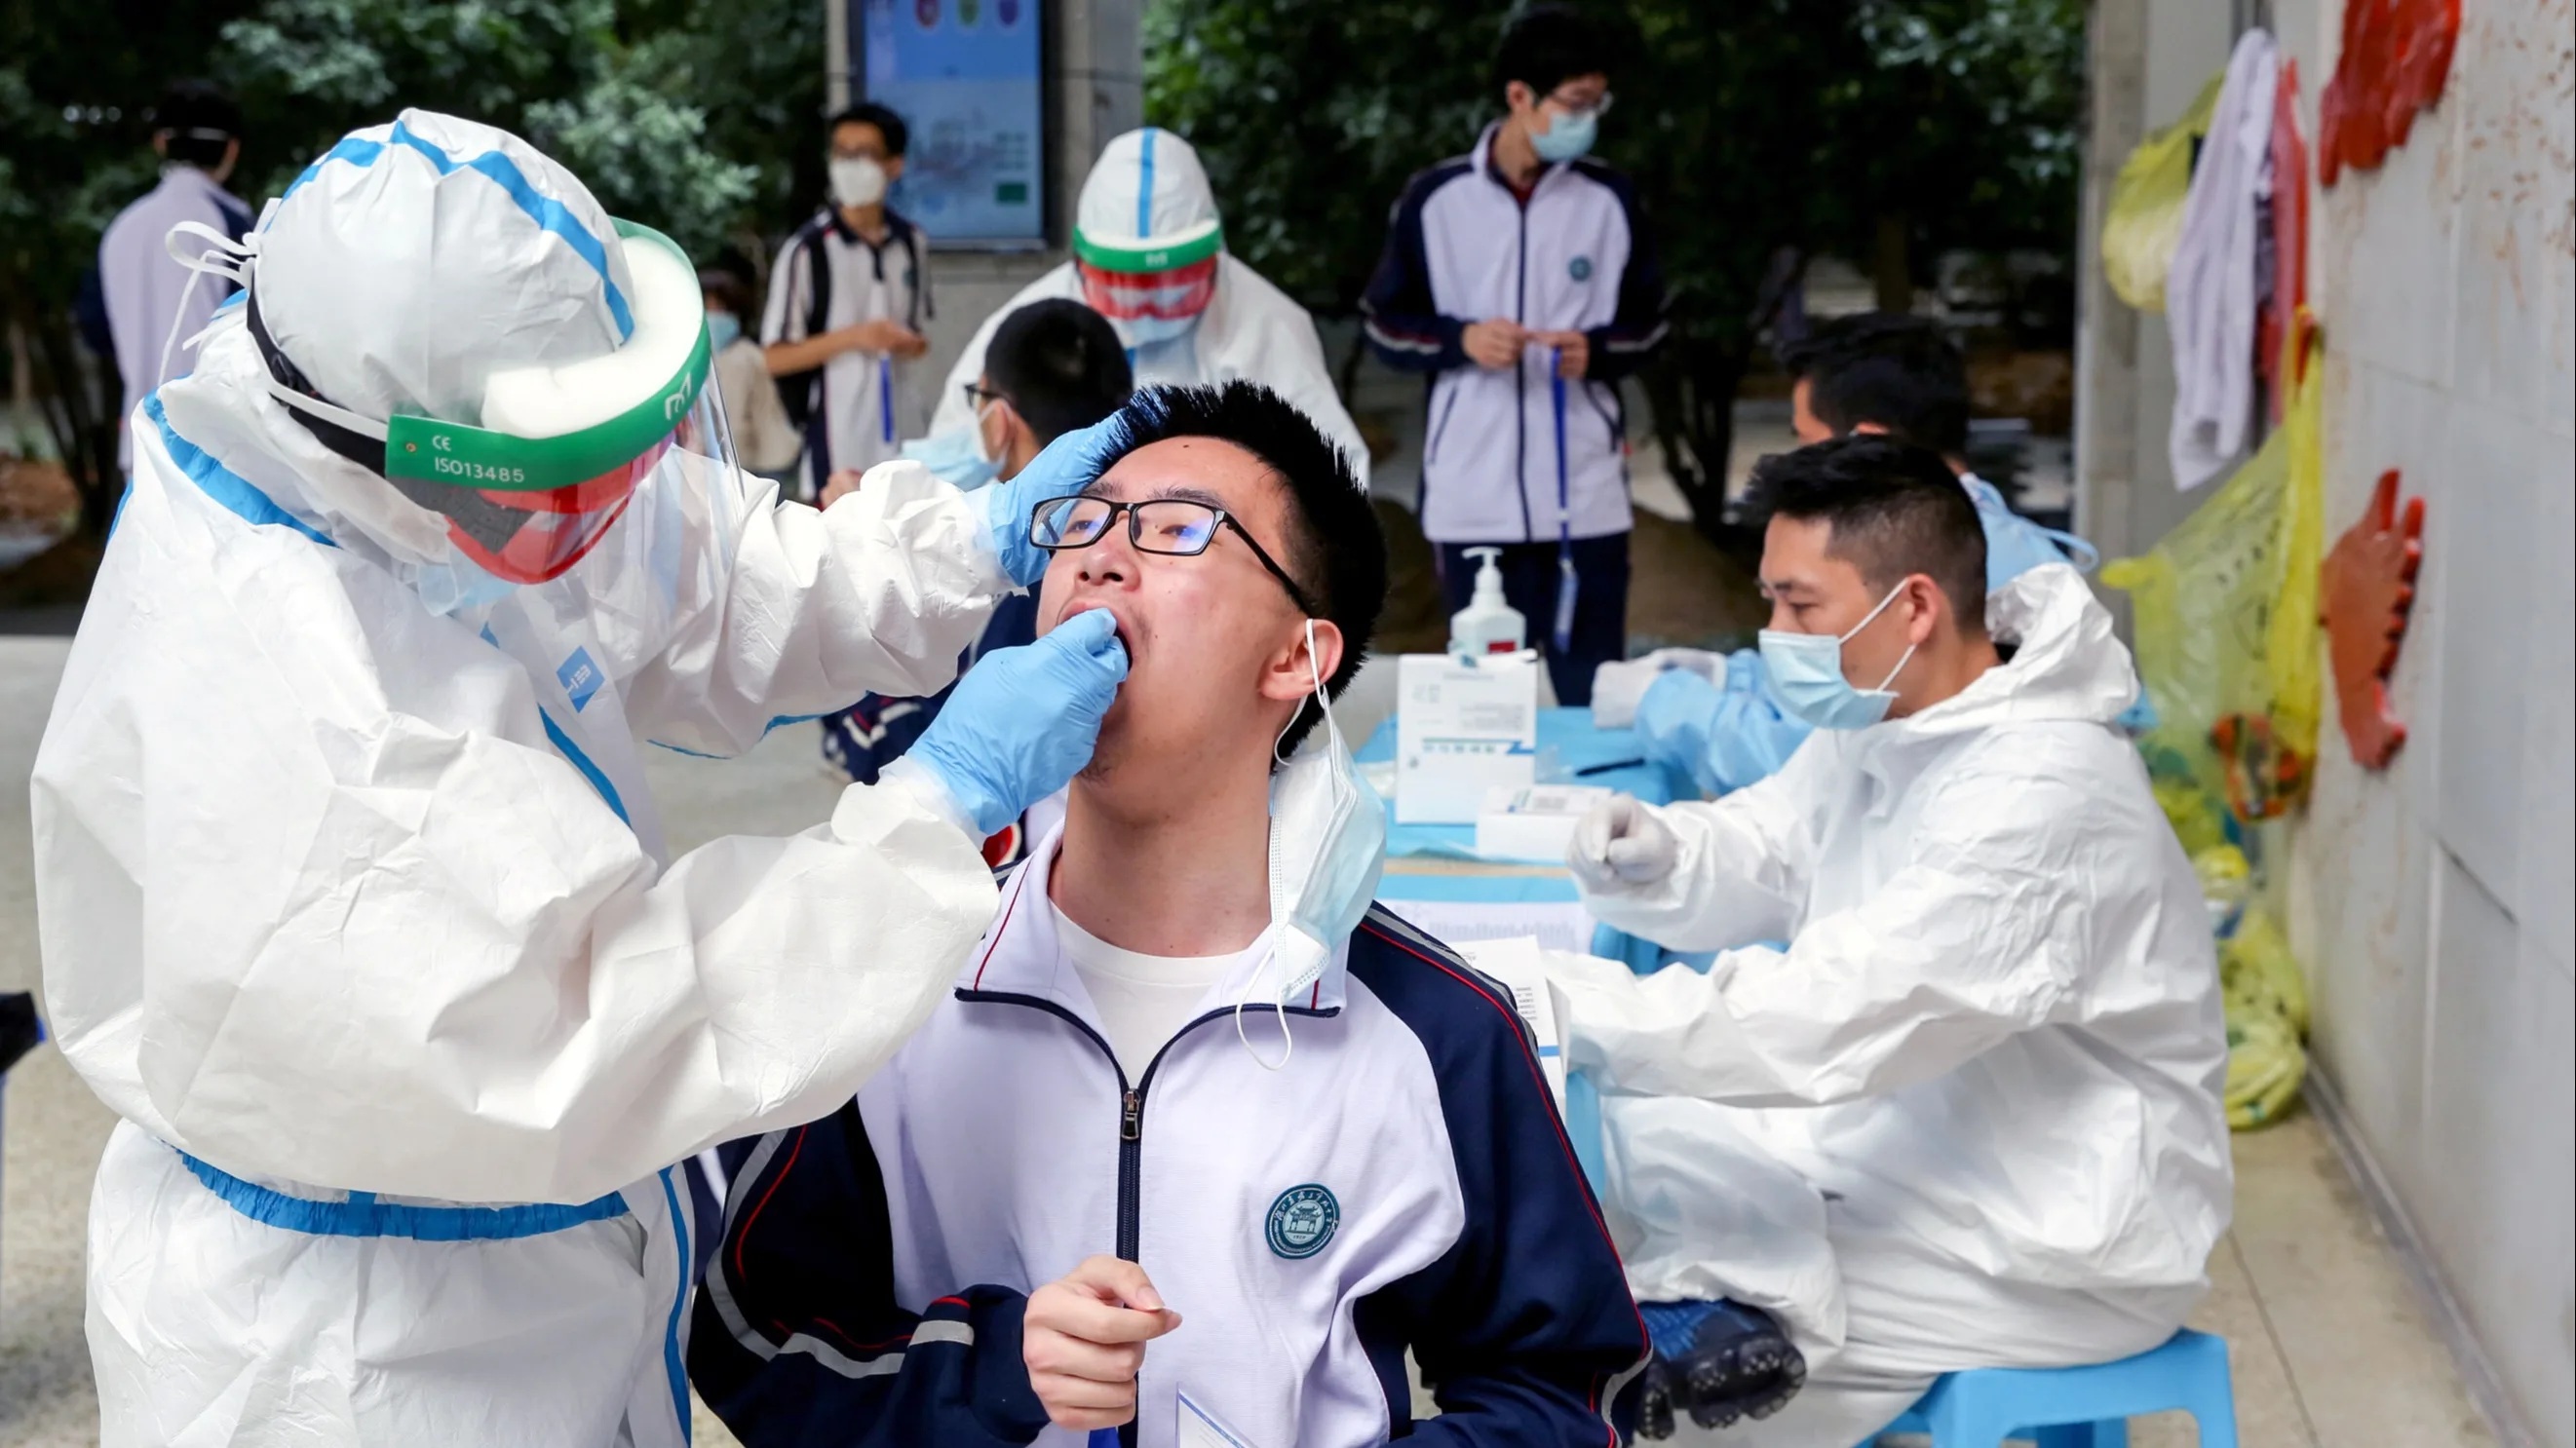 High school students in Wuhan take virus tests on April 30 before returning to school in early May